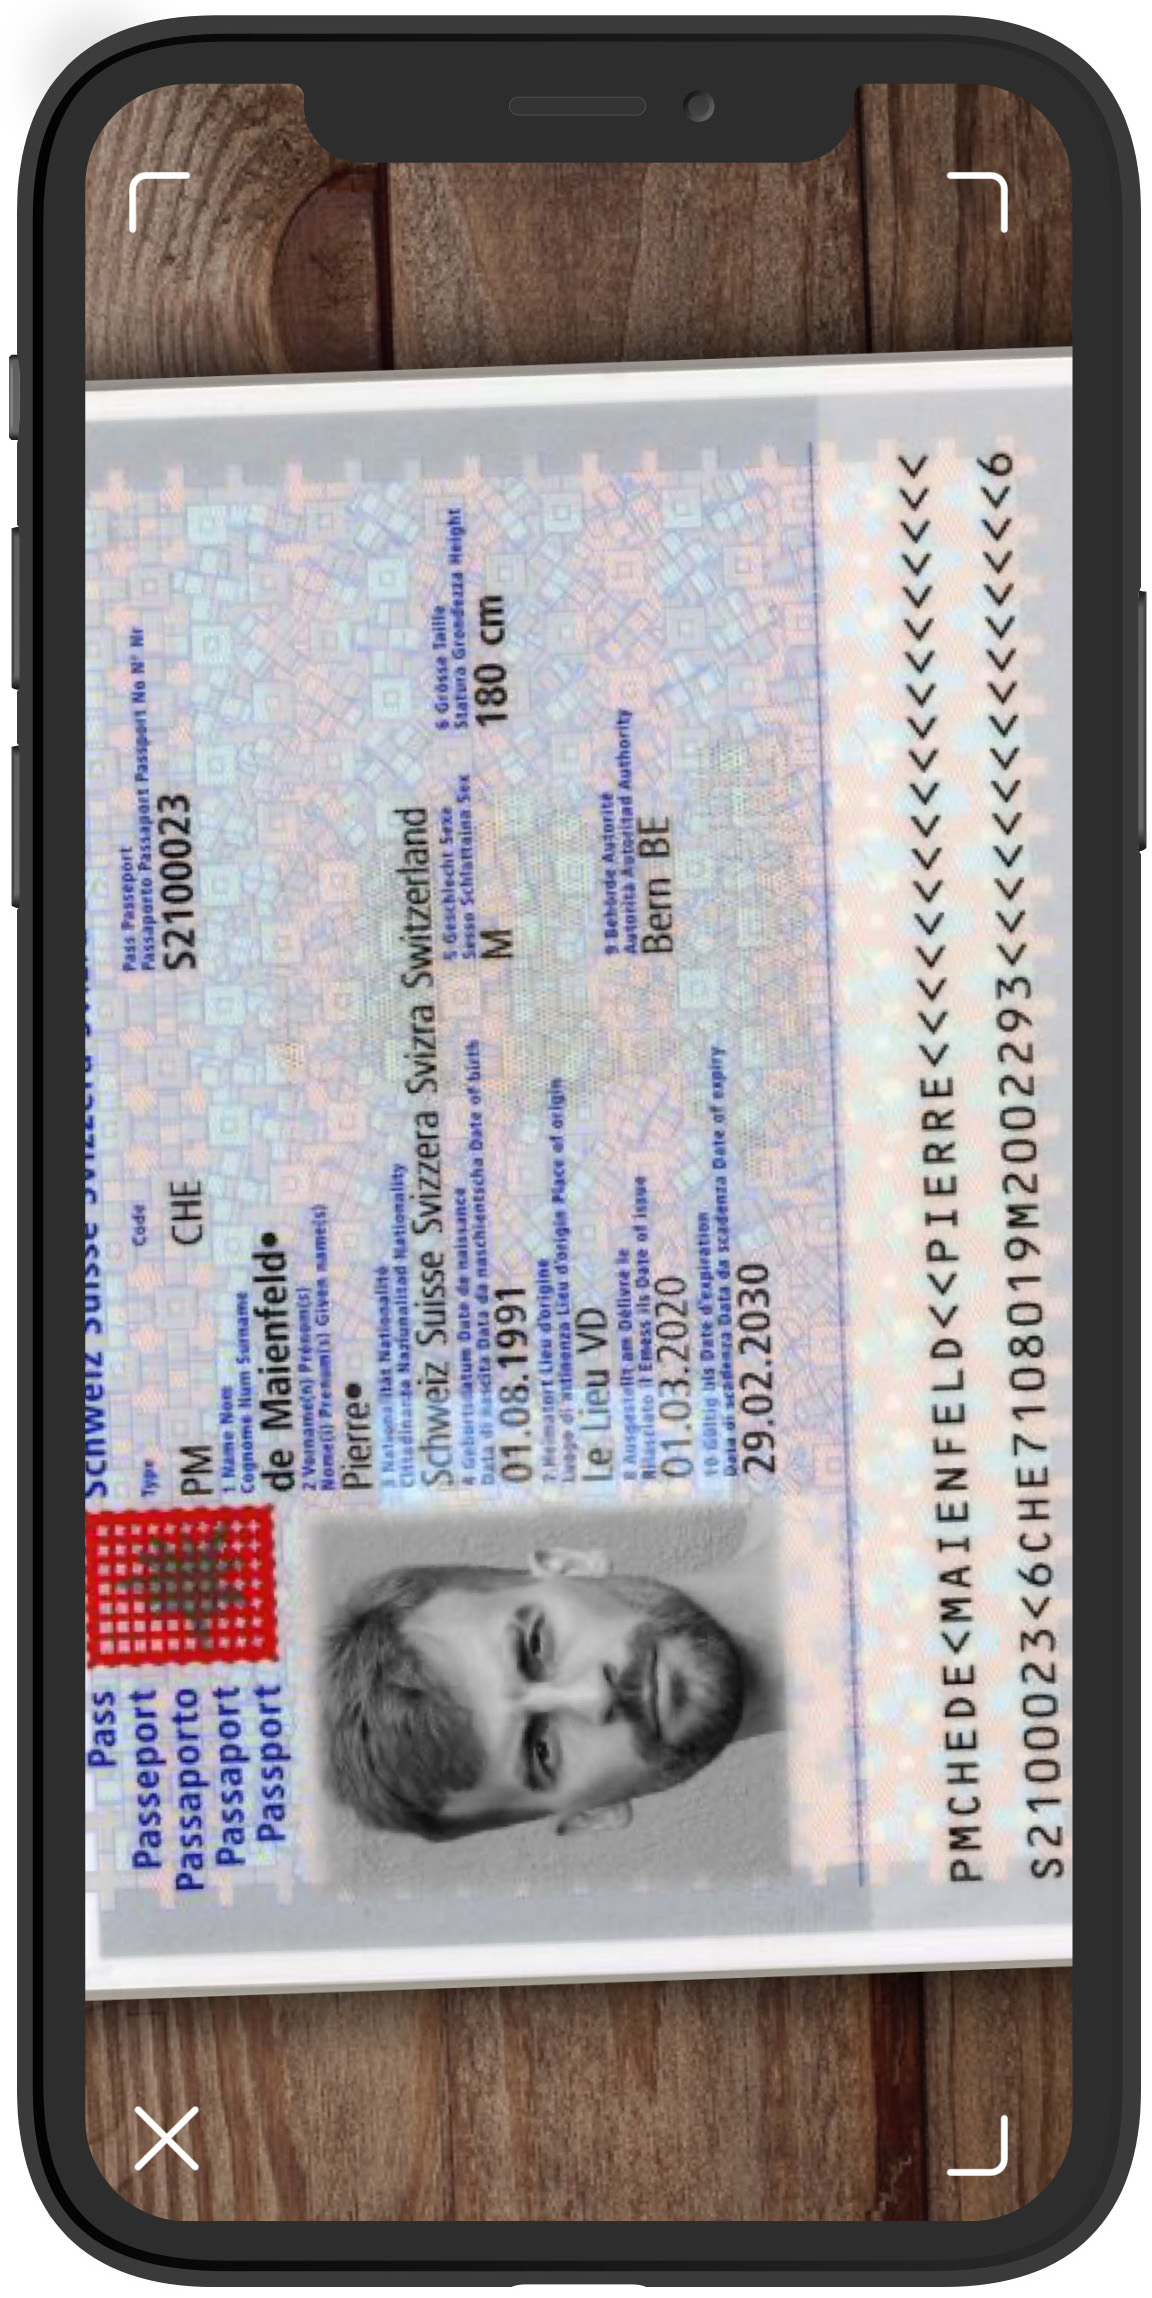 1. Open your passport. Hold the camera of your mobile phone over your passport in such a way that it can scan all of the page’s content.